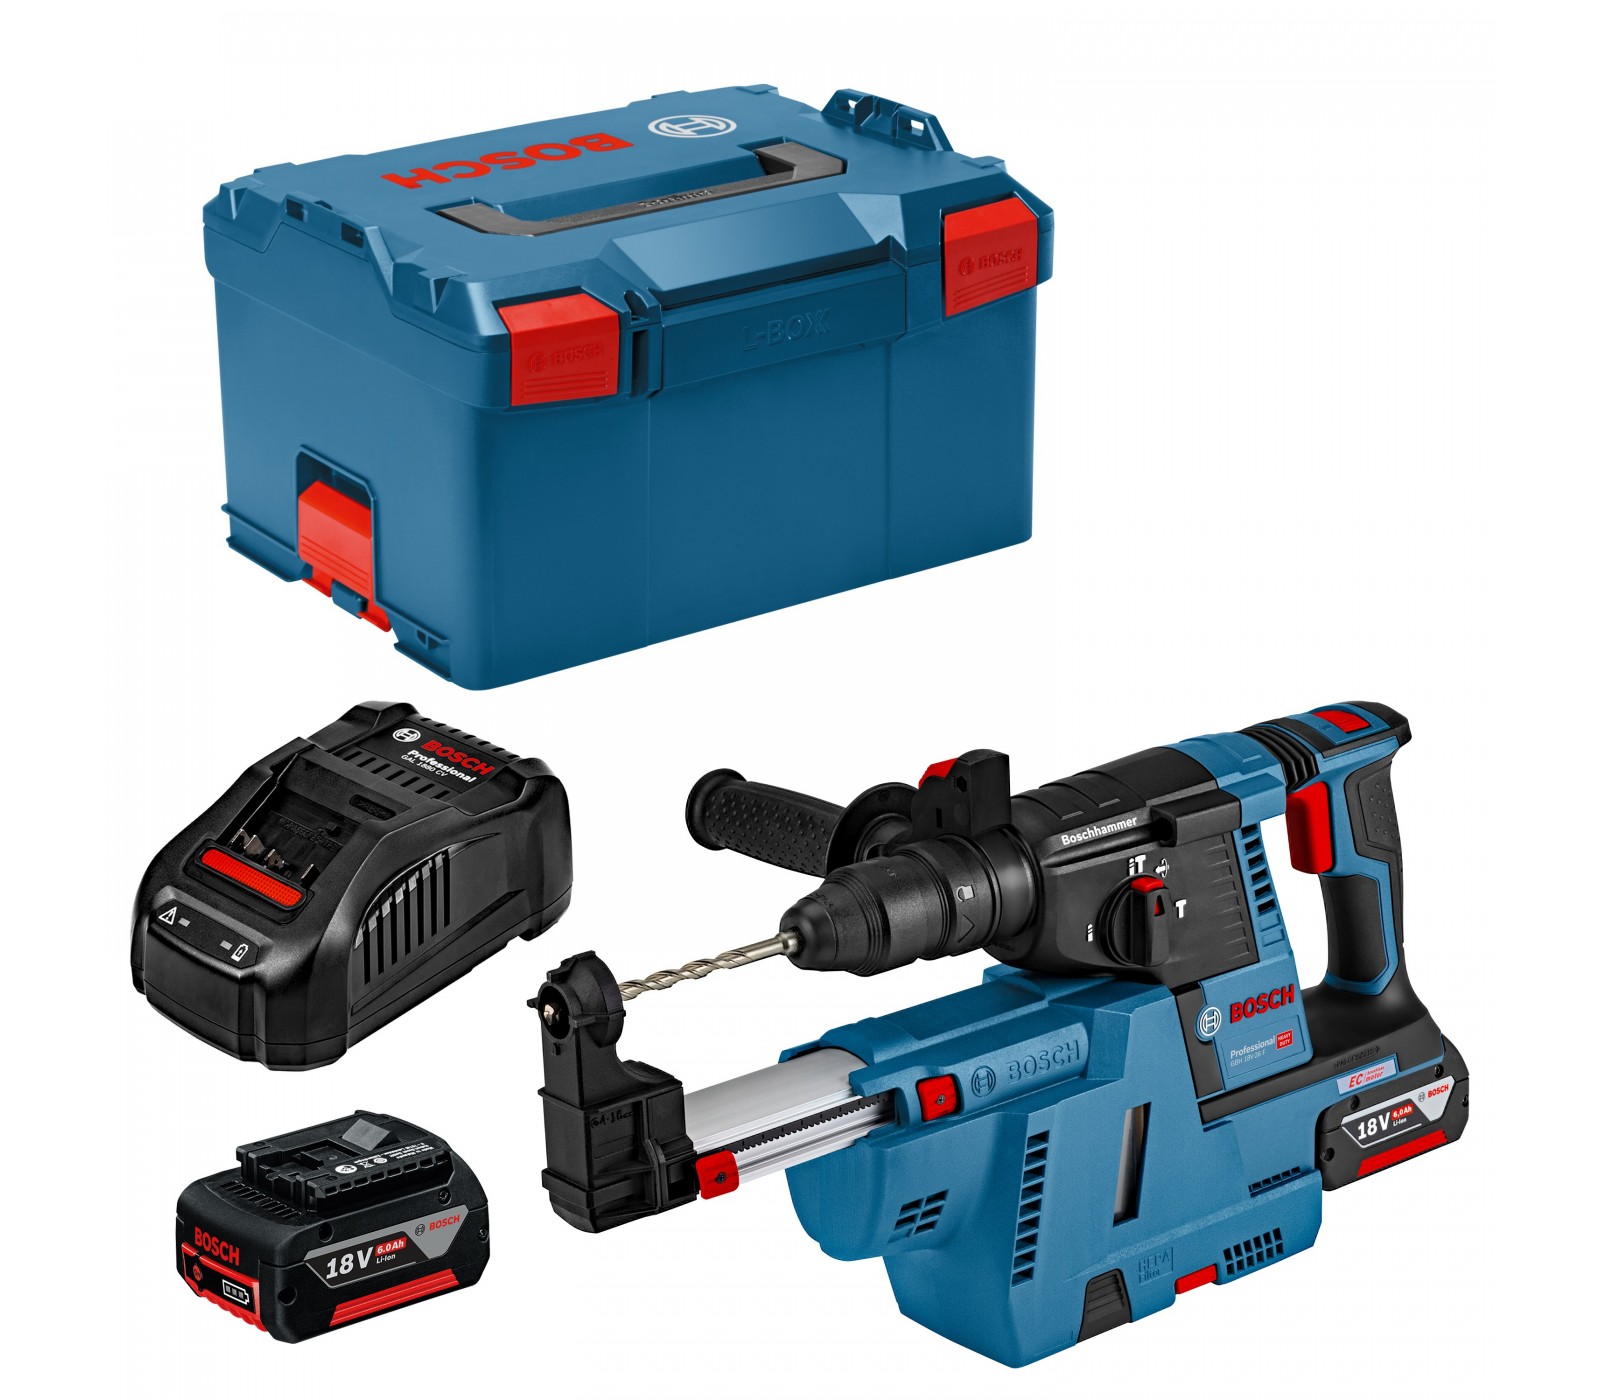 Cordless Rotary Hammer Bosch Gbh 18v 26 F Set Dust Extraction Device 2 X 6 0 Ah Charger Carrying Case